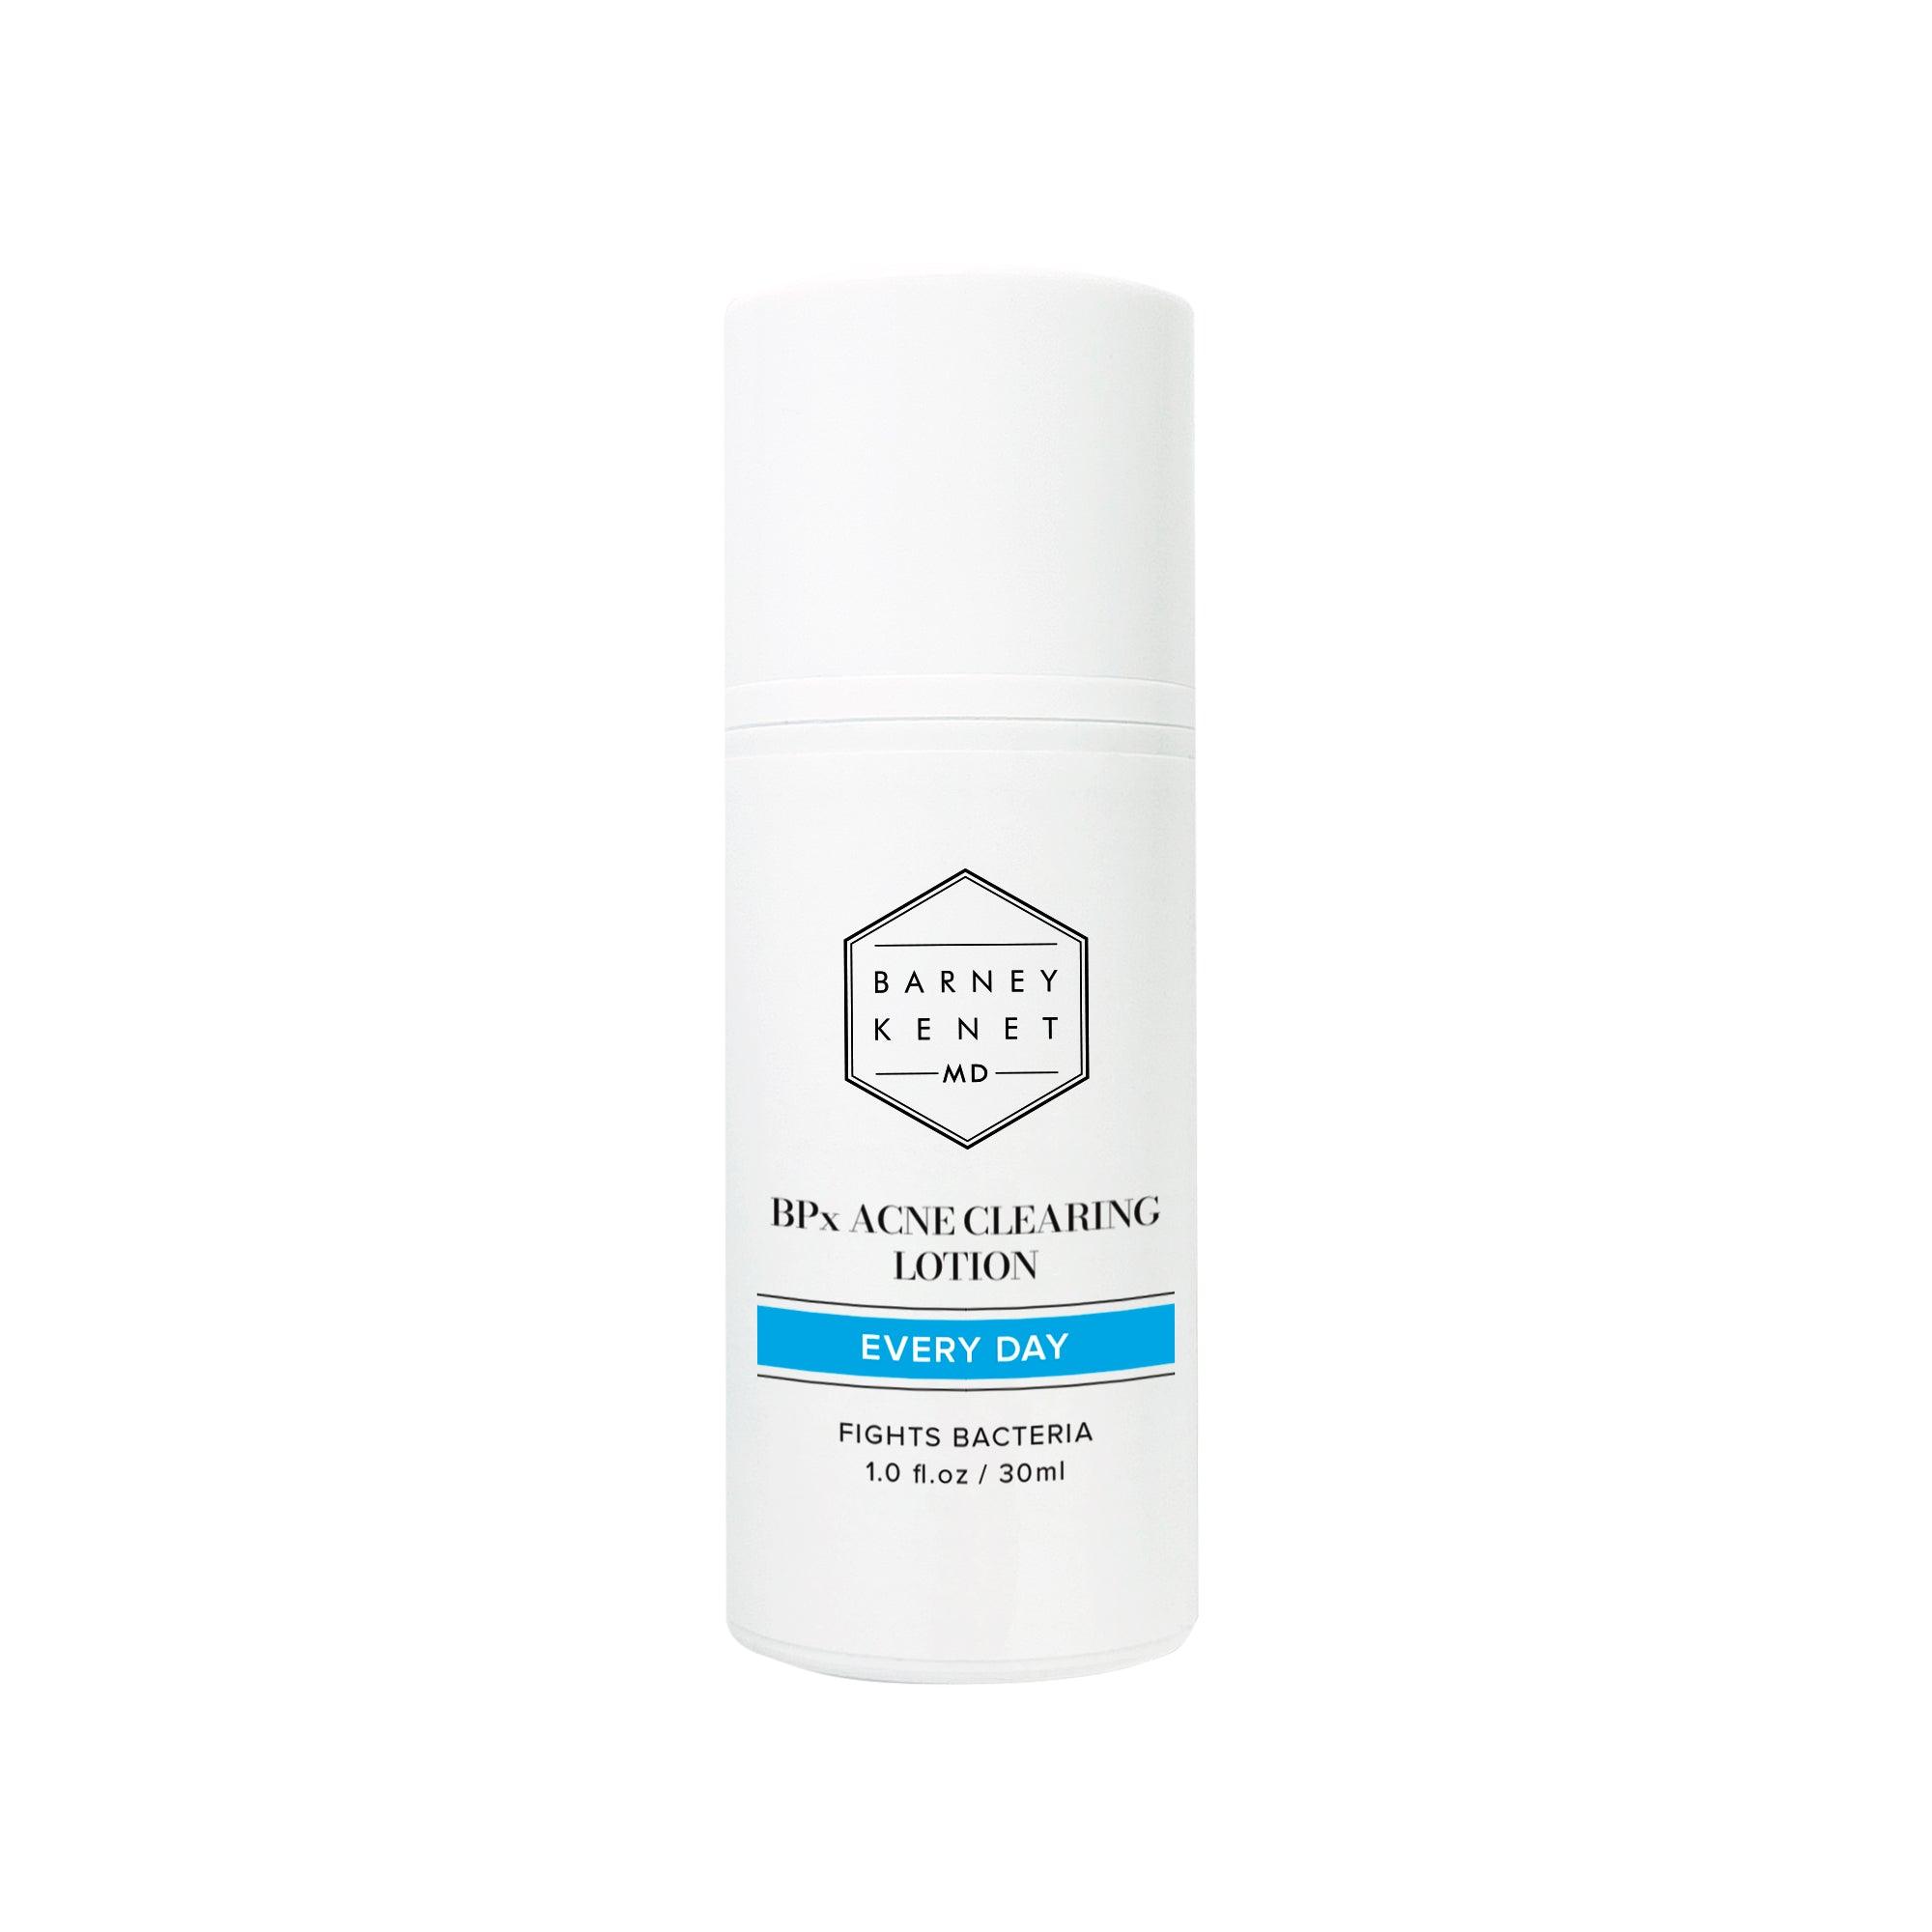 BPx Acne Clearing Lotion - Kenet MD Skincare